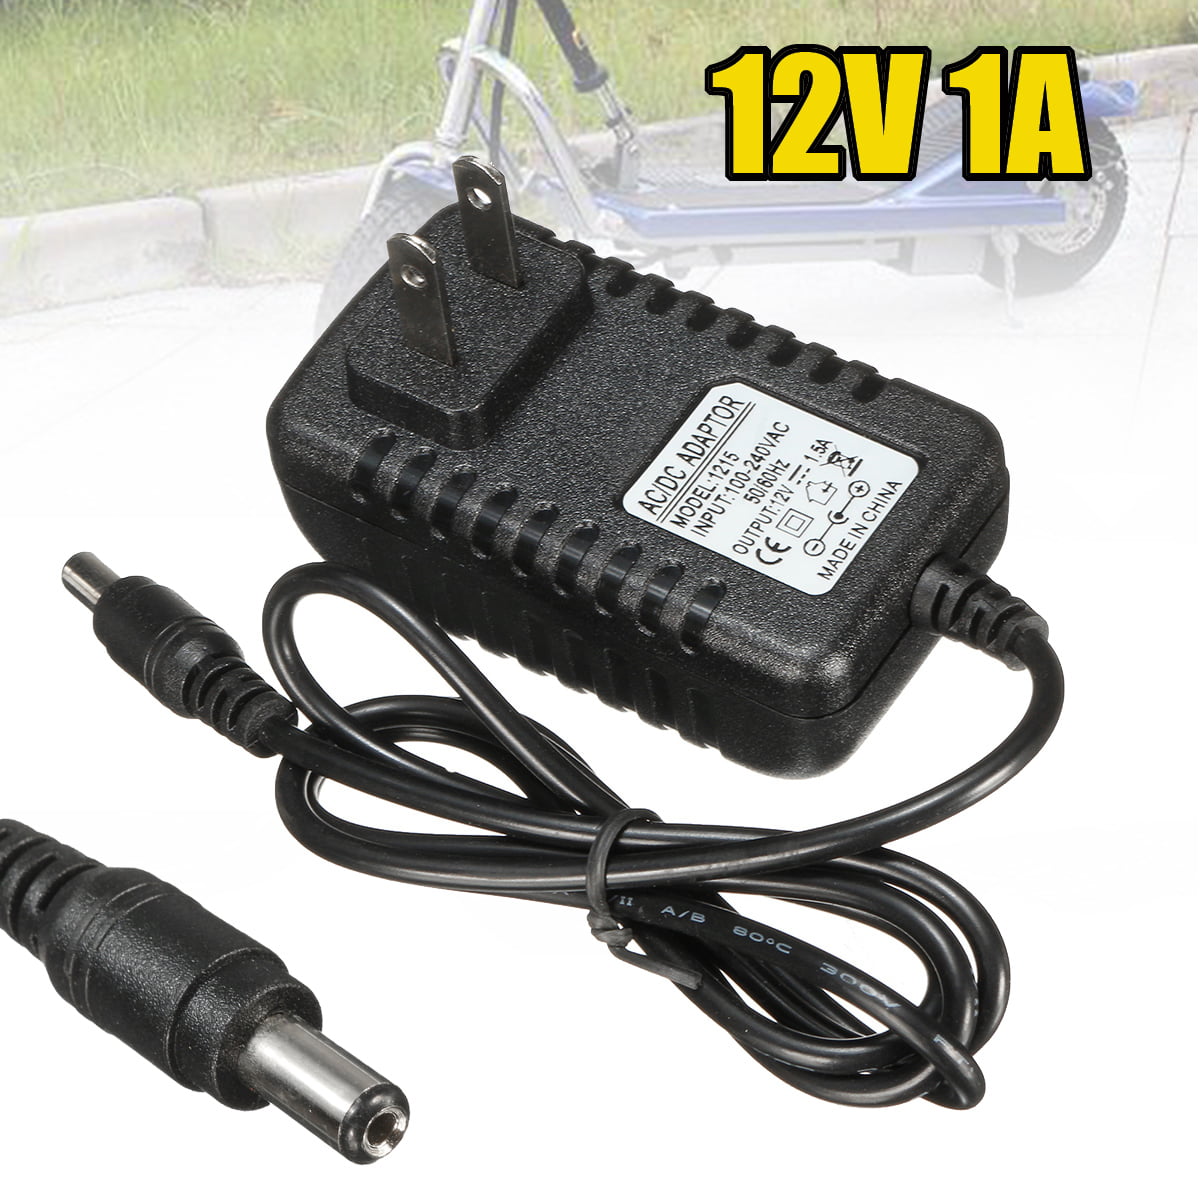 AC DC 6V 1A Battery Charger Adapter For Kids ATV Quad Ride On Cars Motorcycles ！ 